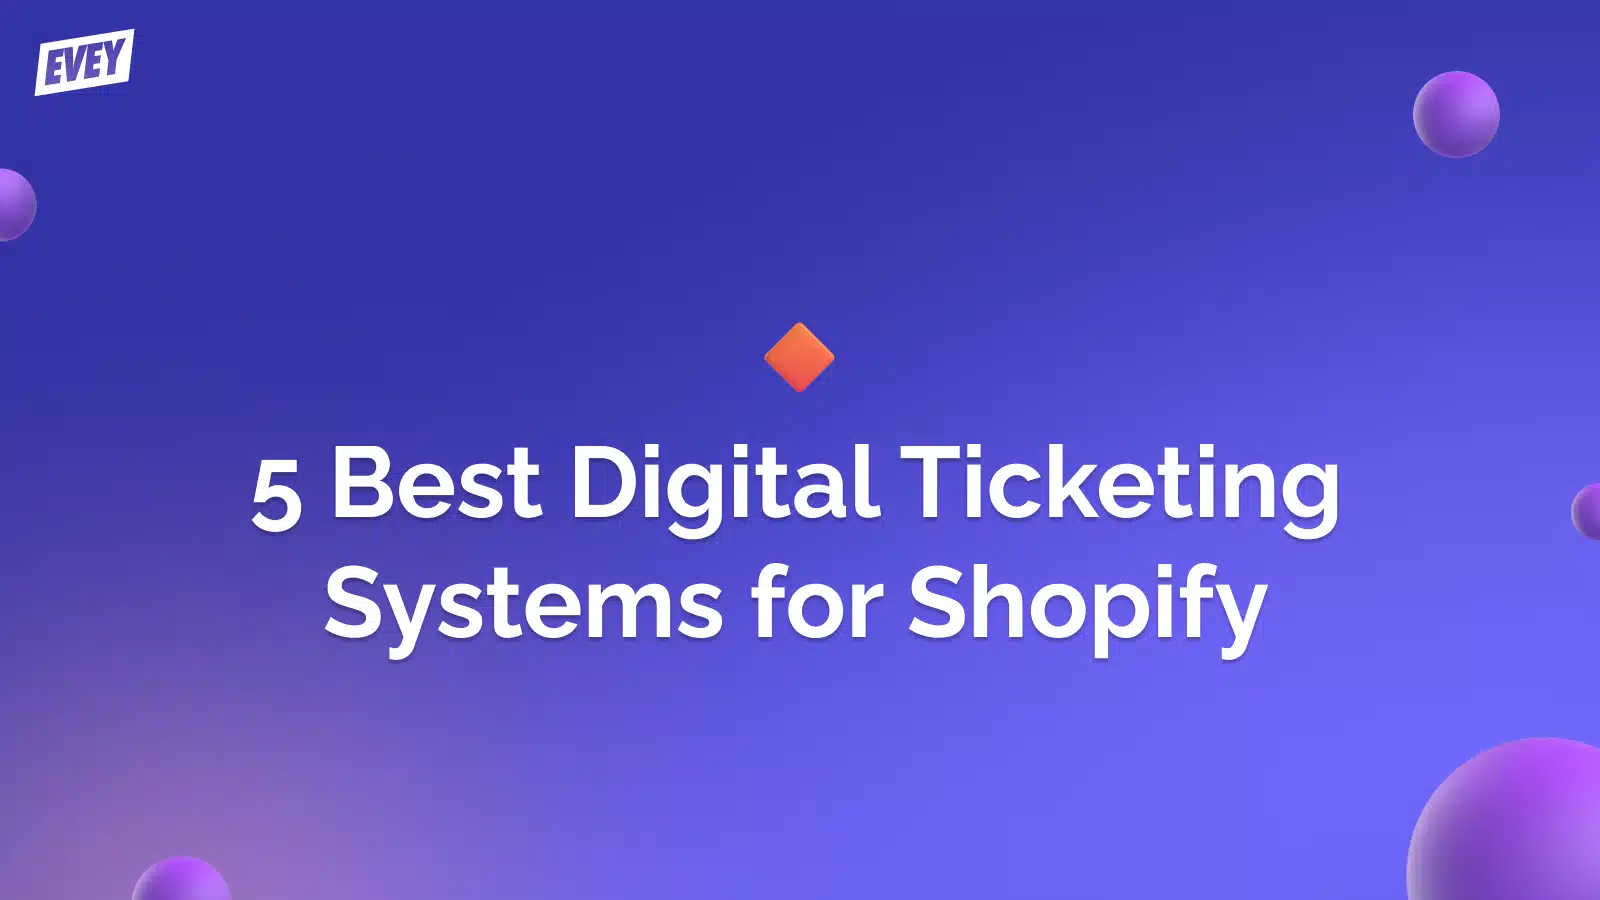 Image card 5 Best Digital Ticketing Systems for Shopify